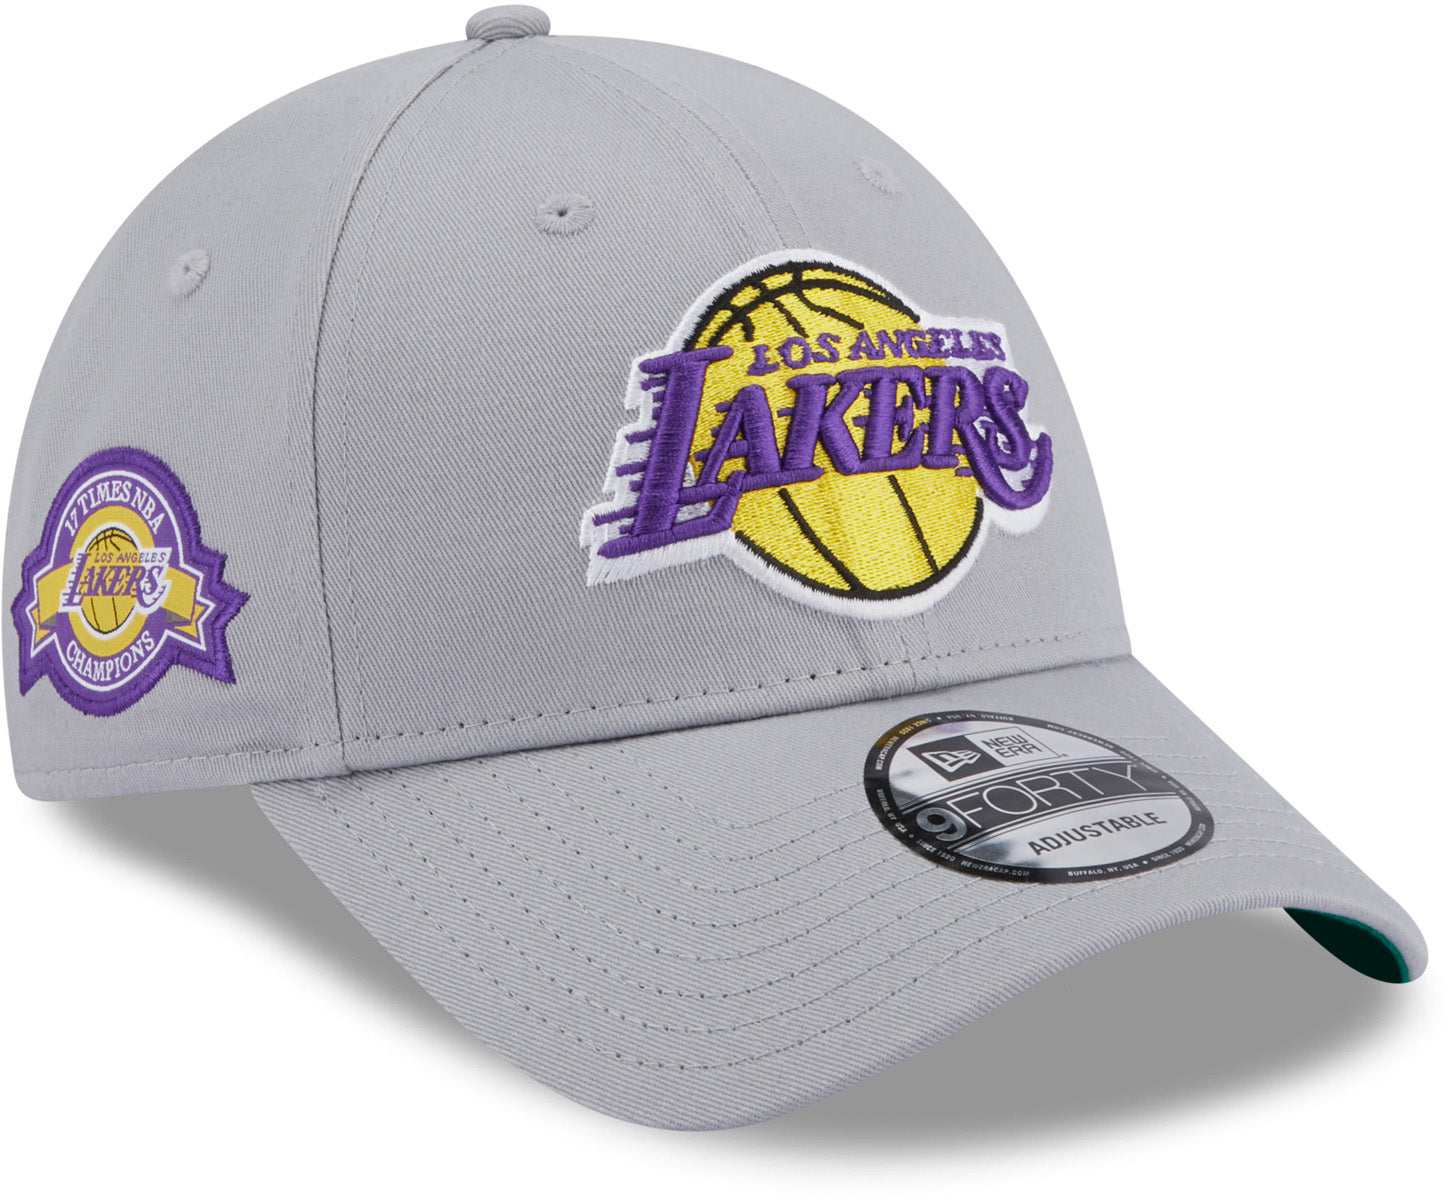 New Era Home Field 9FORTY Trucker Los Angeles Lakers Cap White